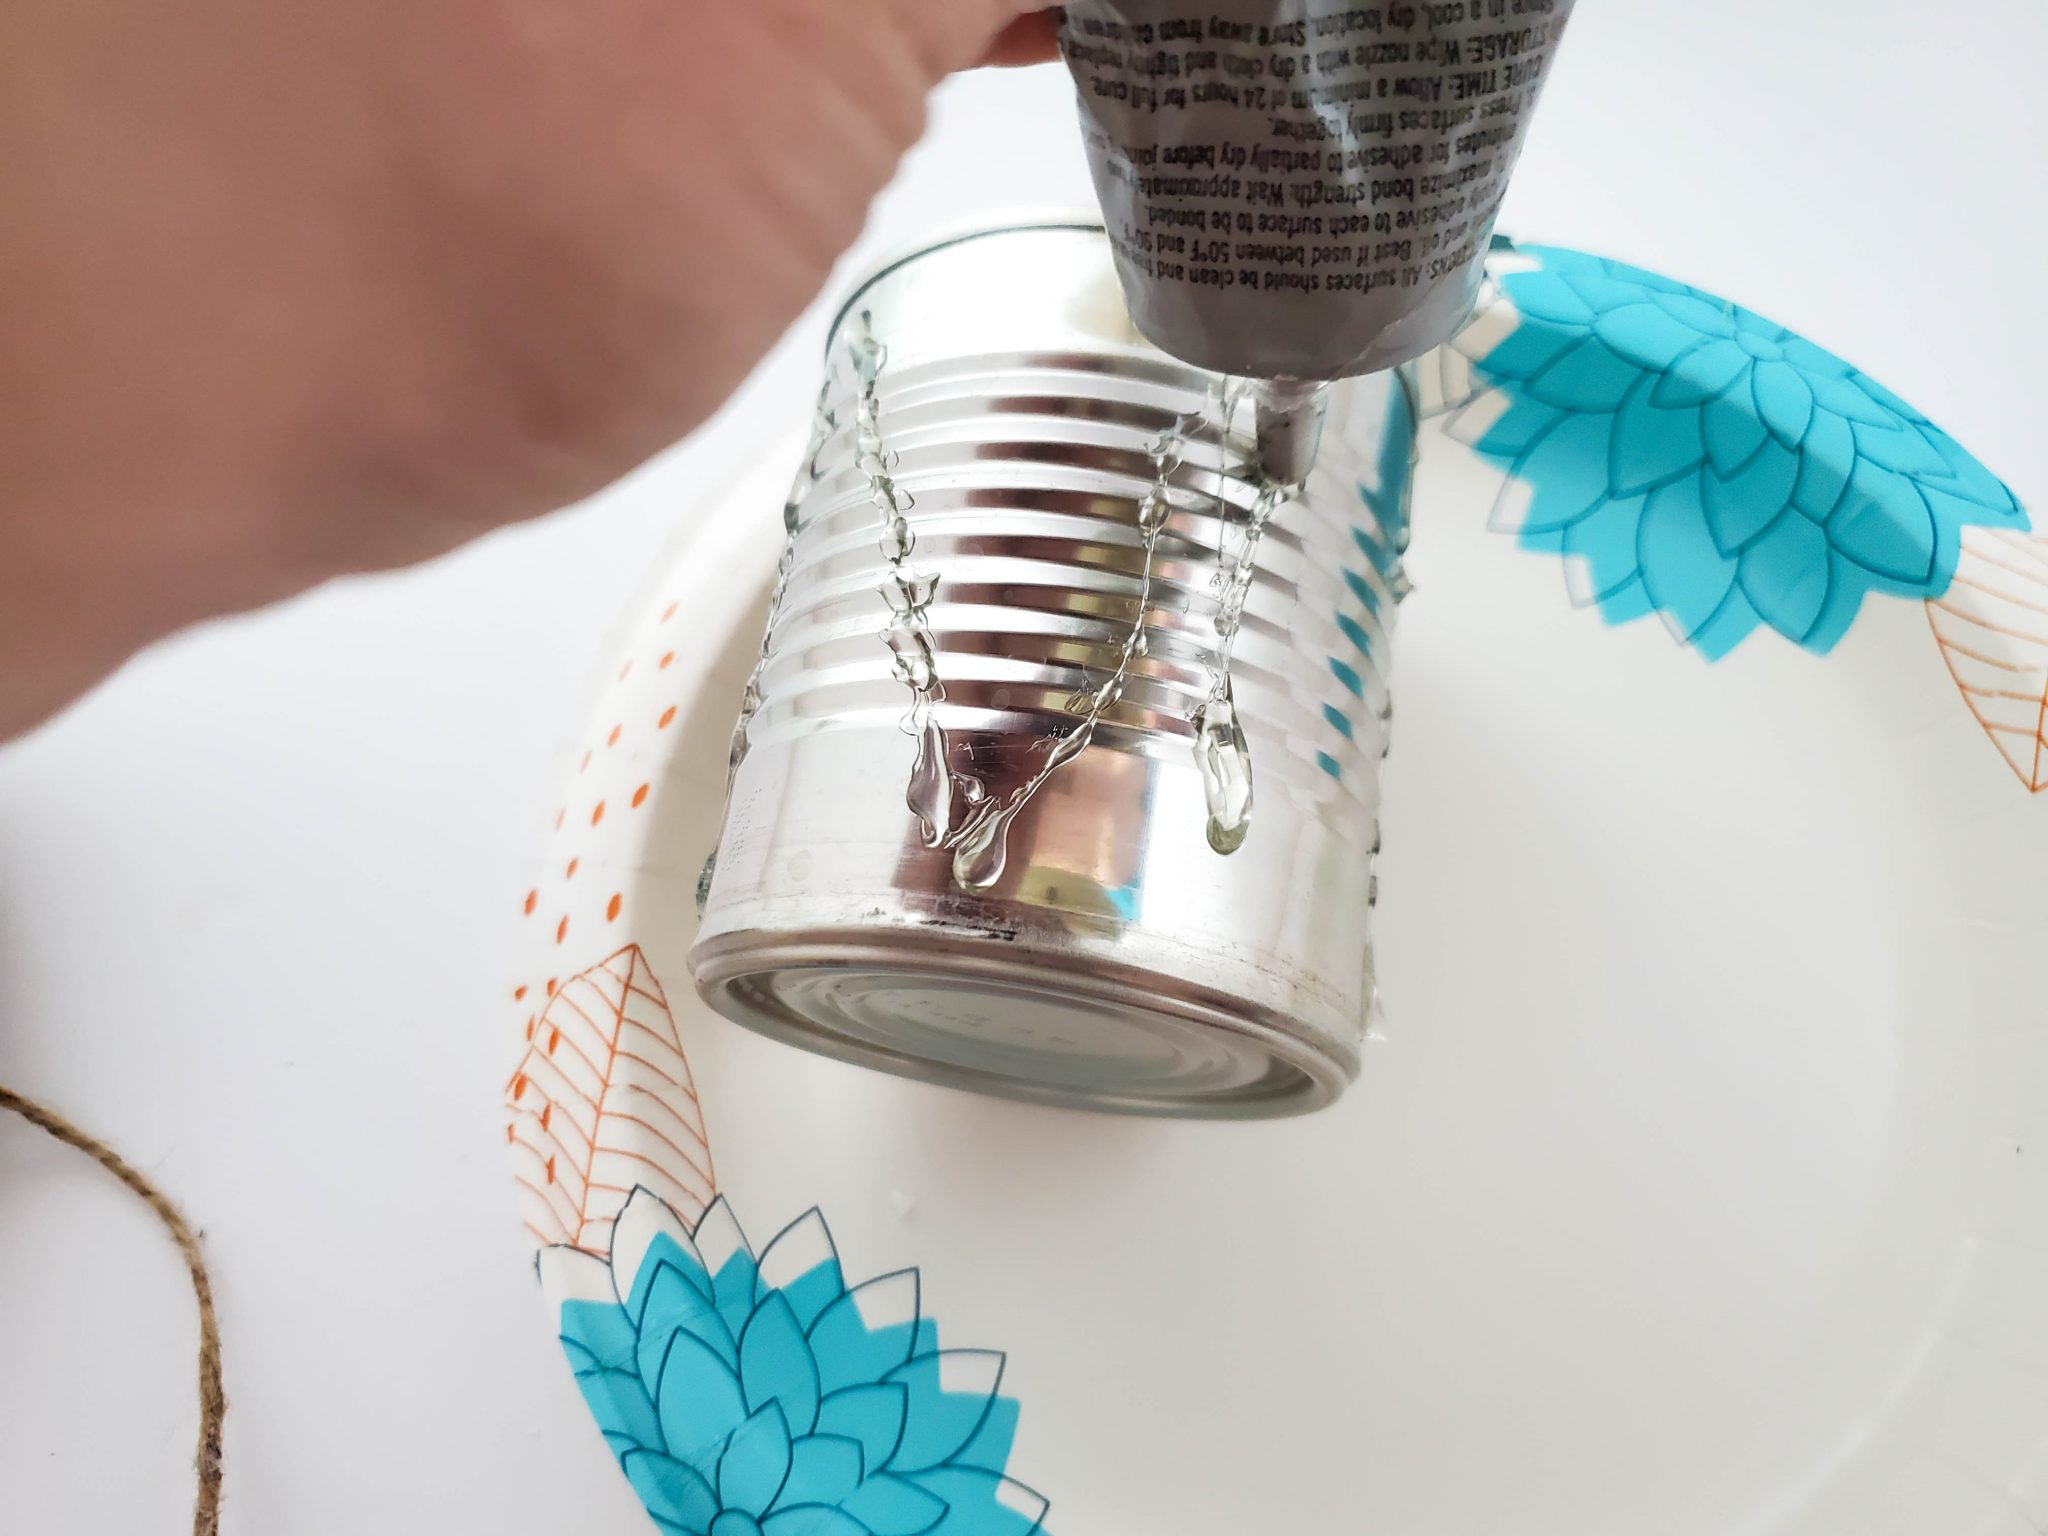 Easy Upcycled Twine and Lace Cans Craft - Sweet Pea